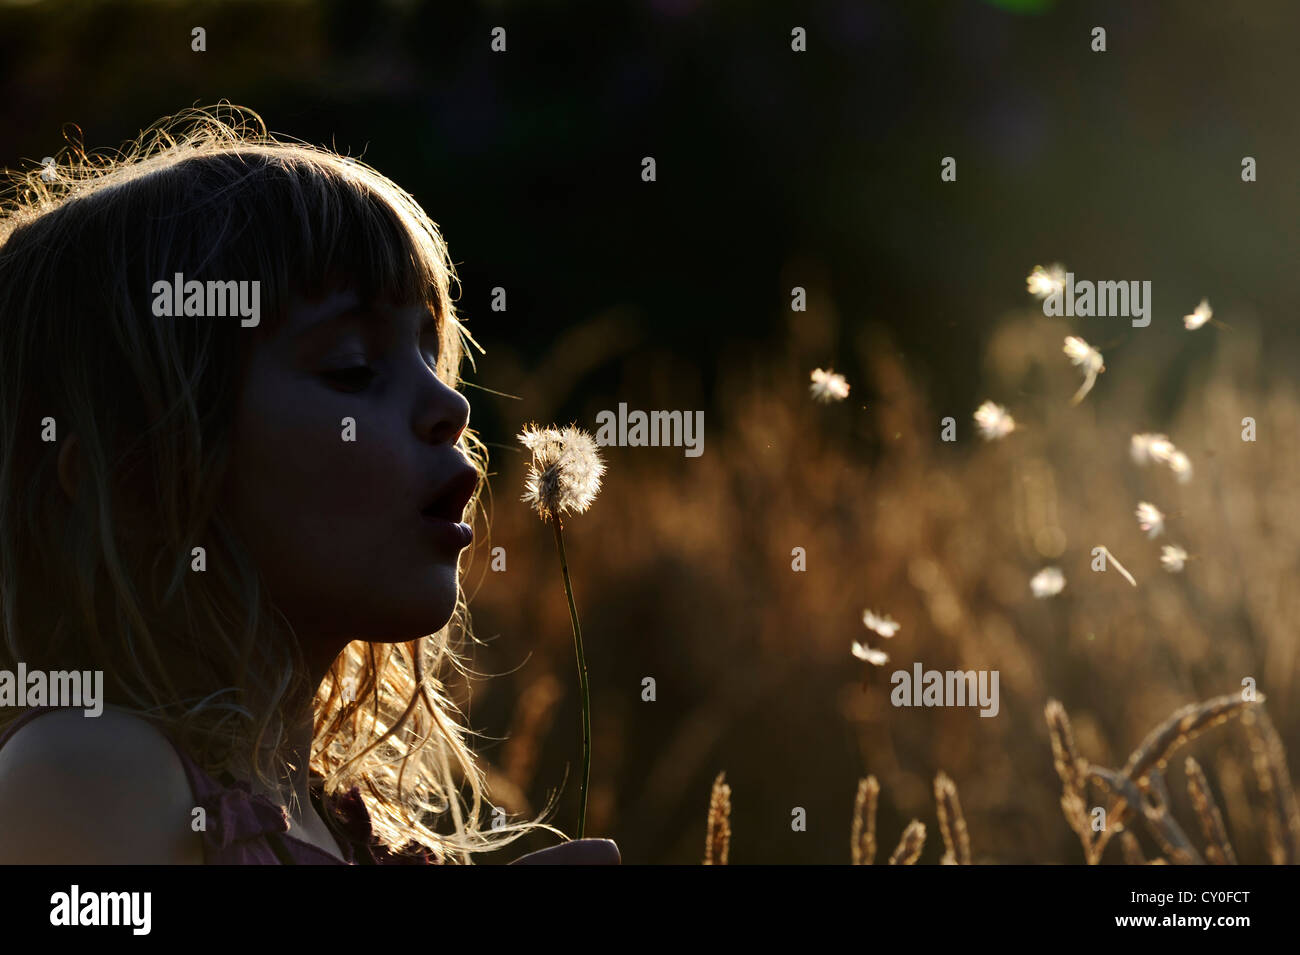 Young girl playing in meadow in late summer Norfolk - Model Released Stock Photo